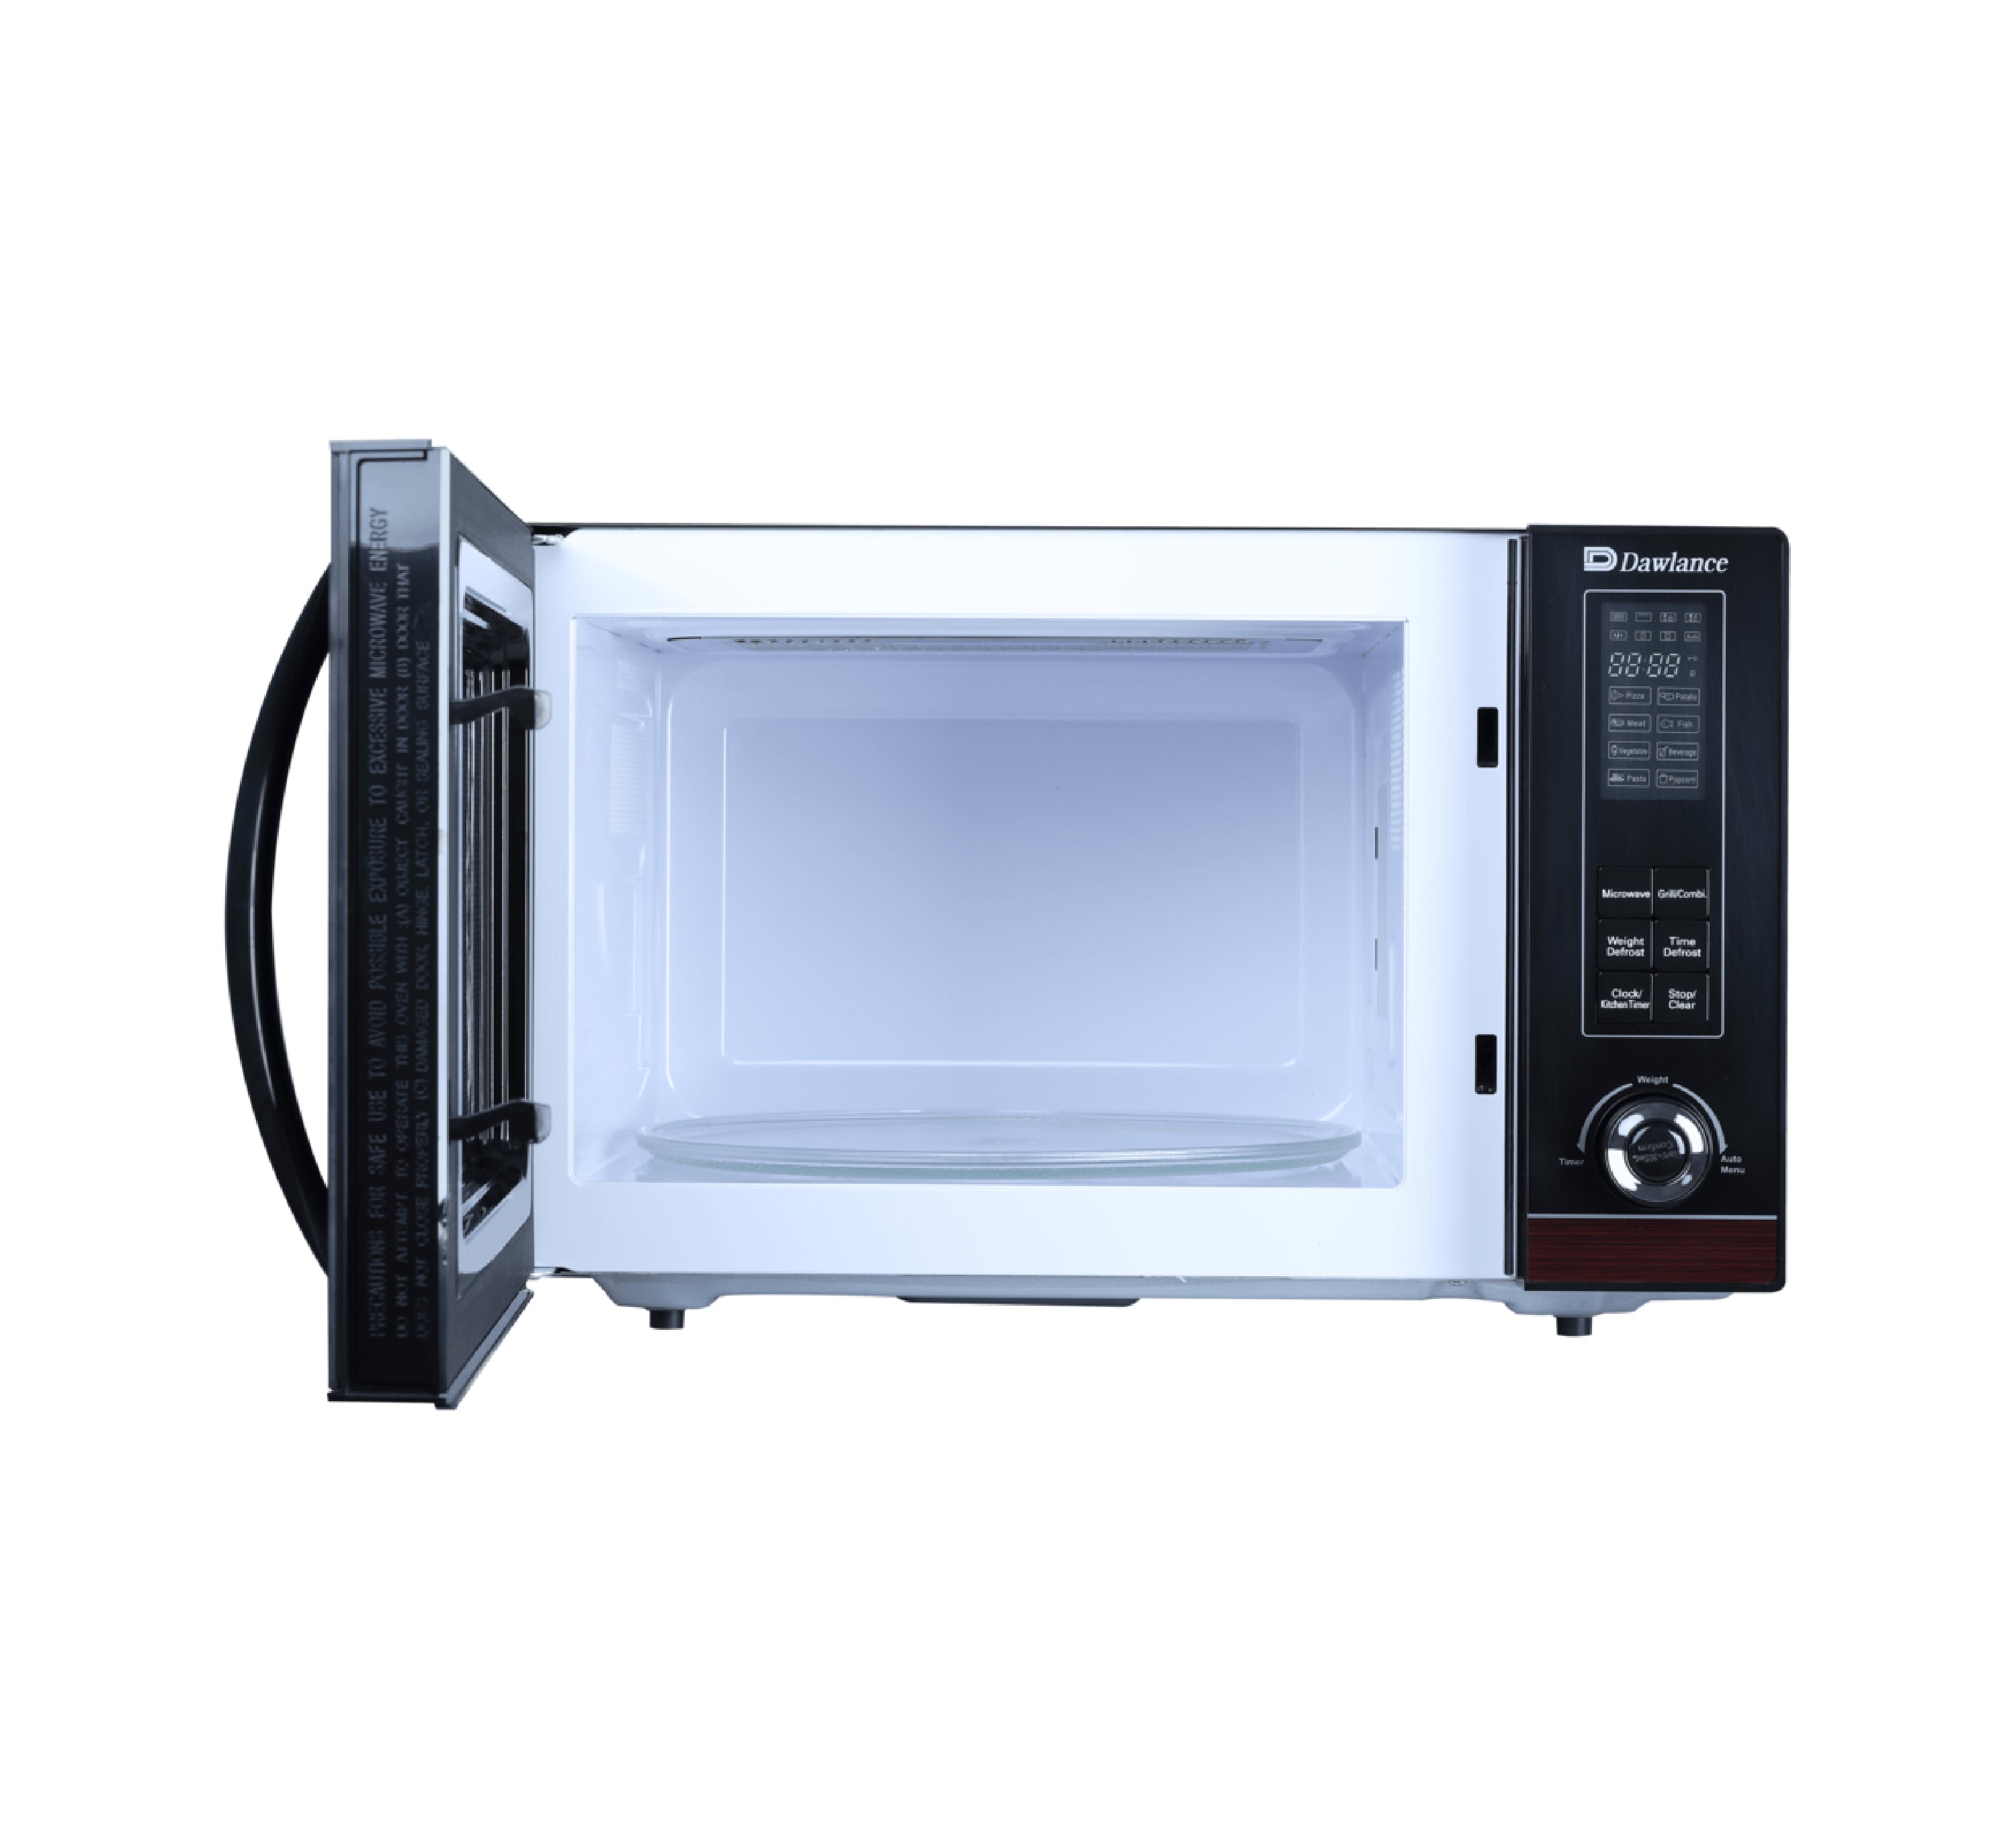 DAWLANCE DW-133 G - Grilling Microwave Oven